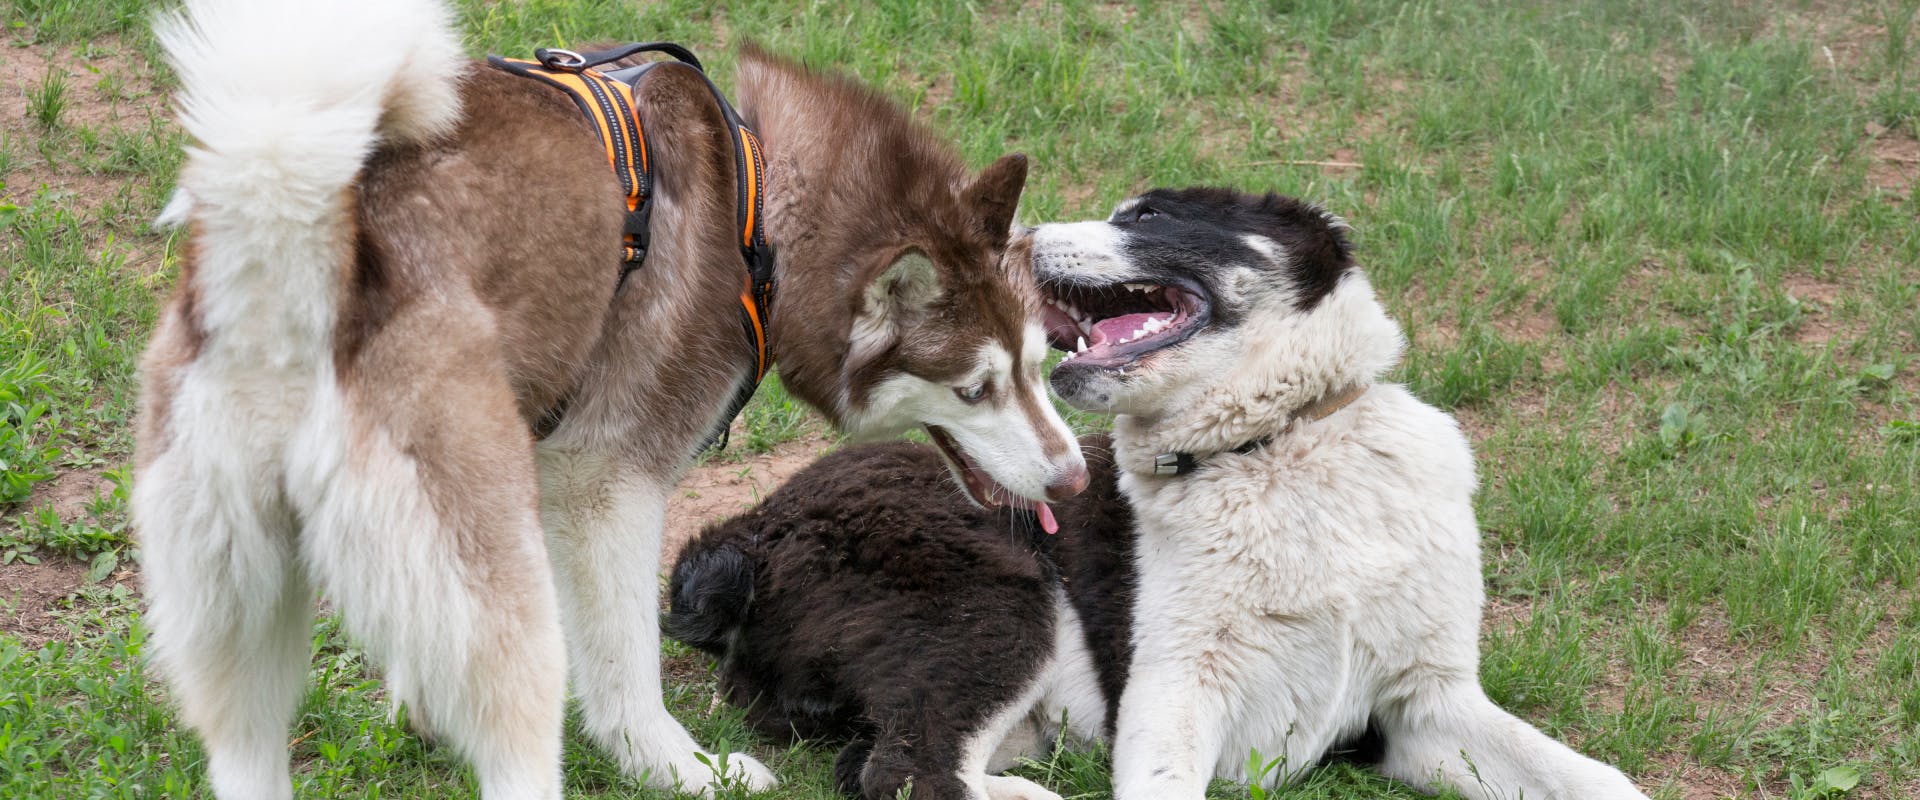 Two dogs meet in a dog park.